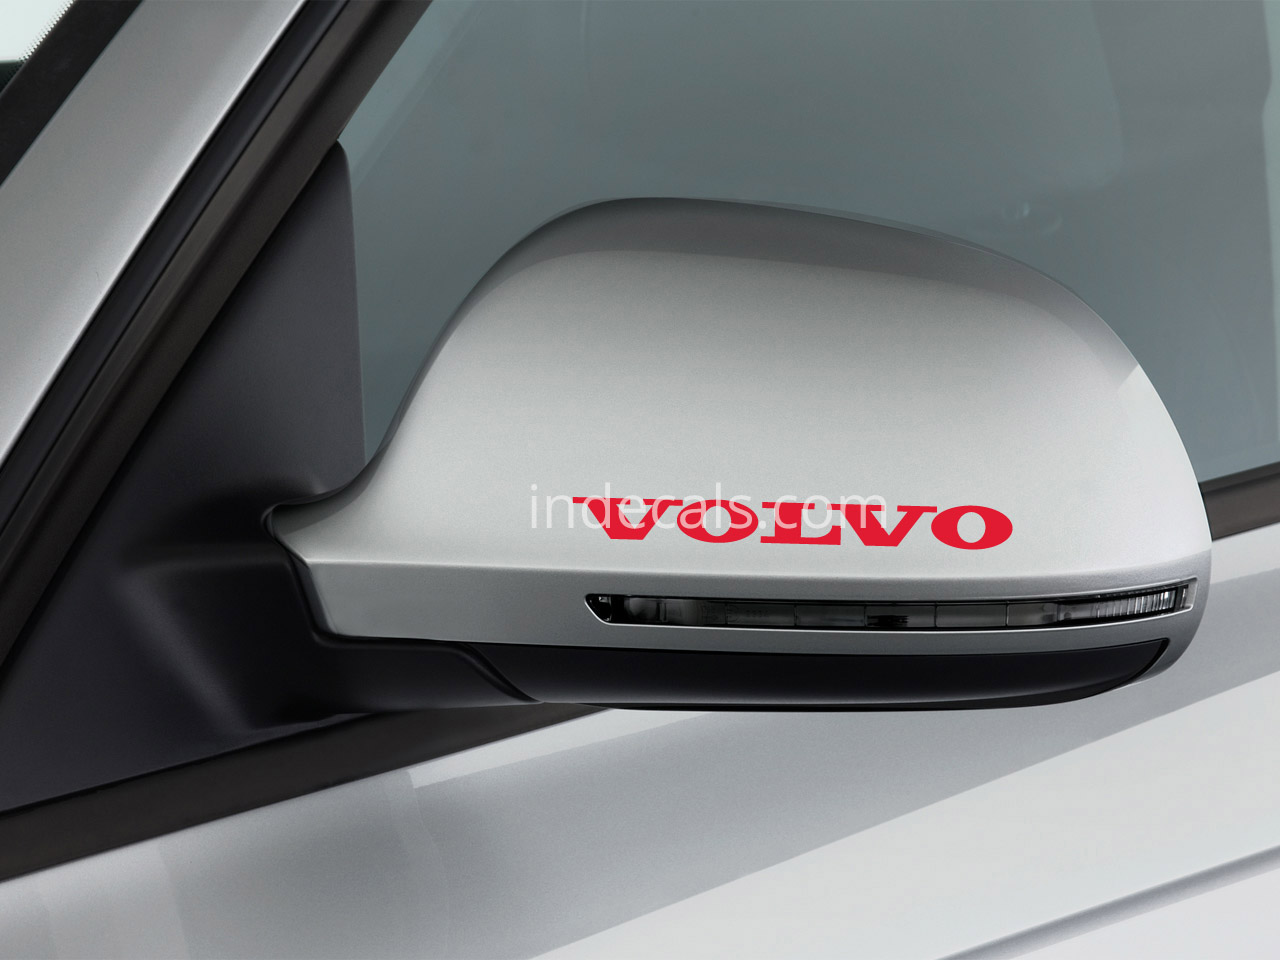 3 x Volvo Stickers for Mirrors - Red